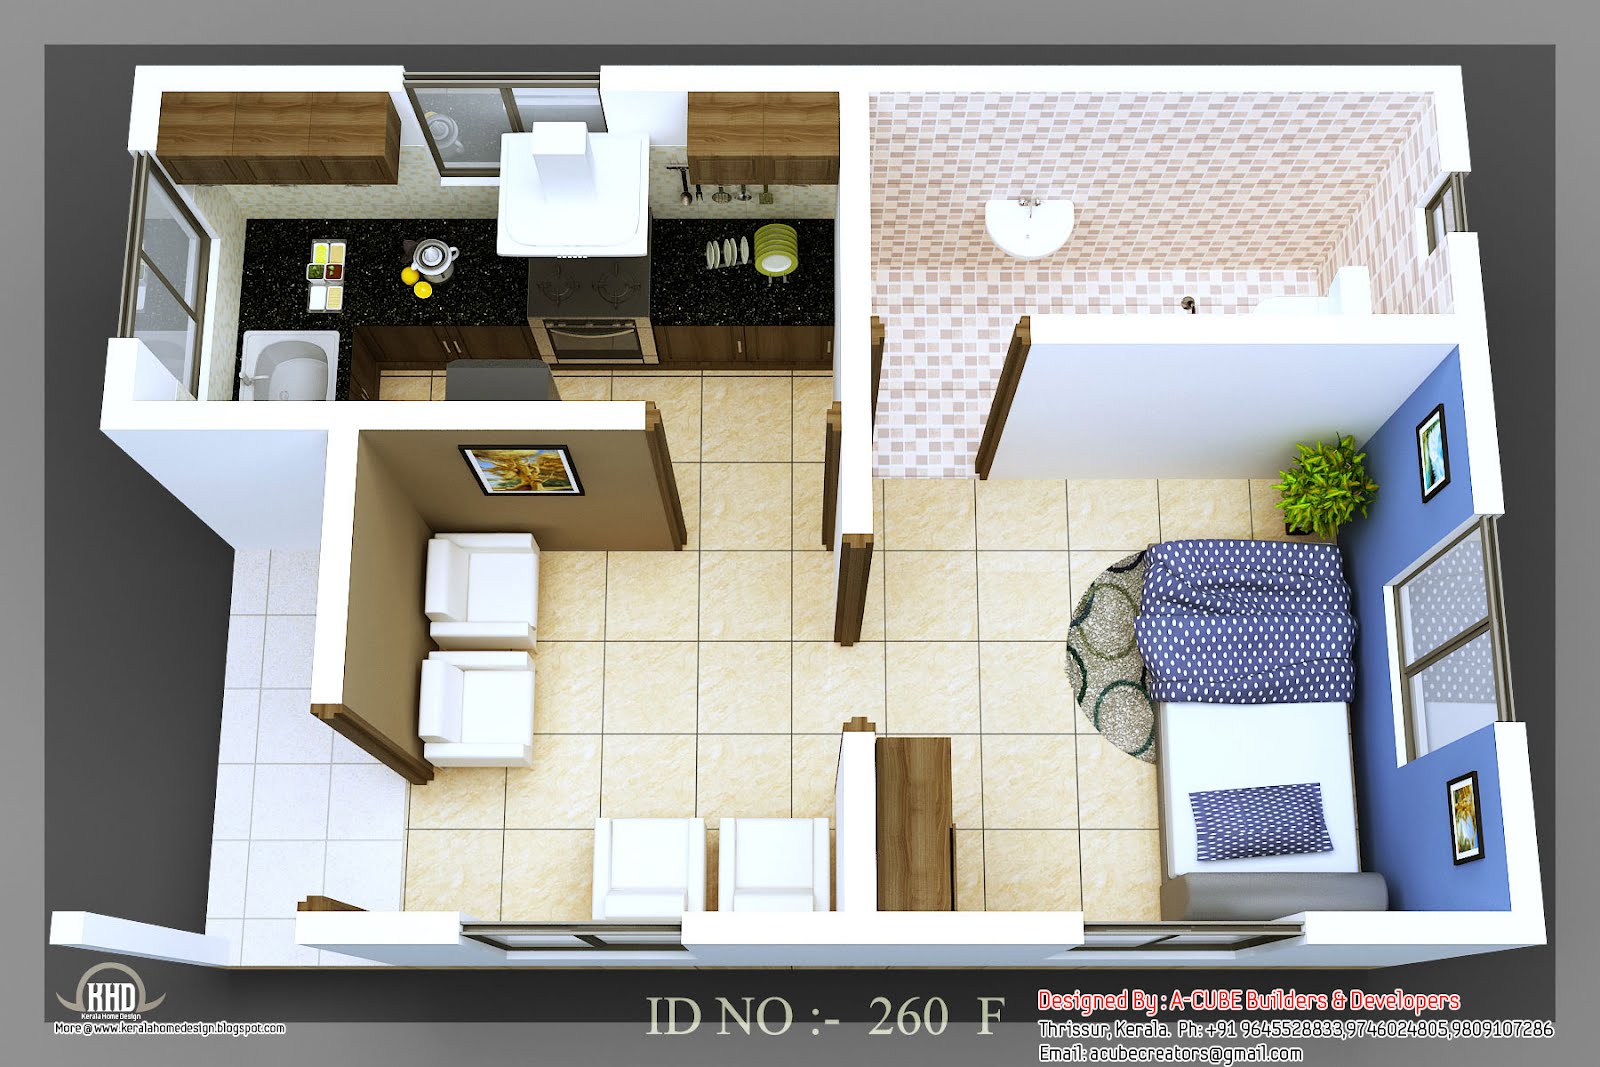  3D  isometric views of small house  plans  Kerala home  